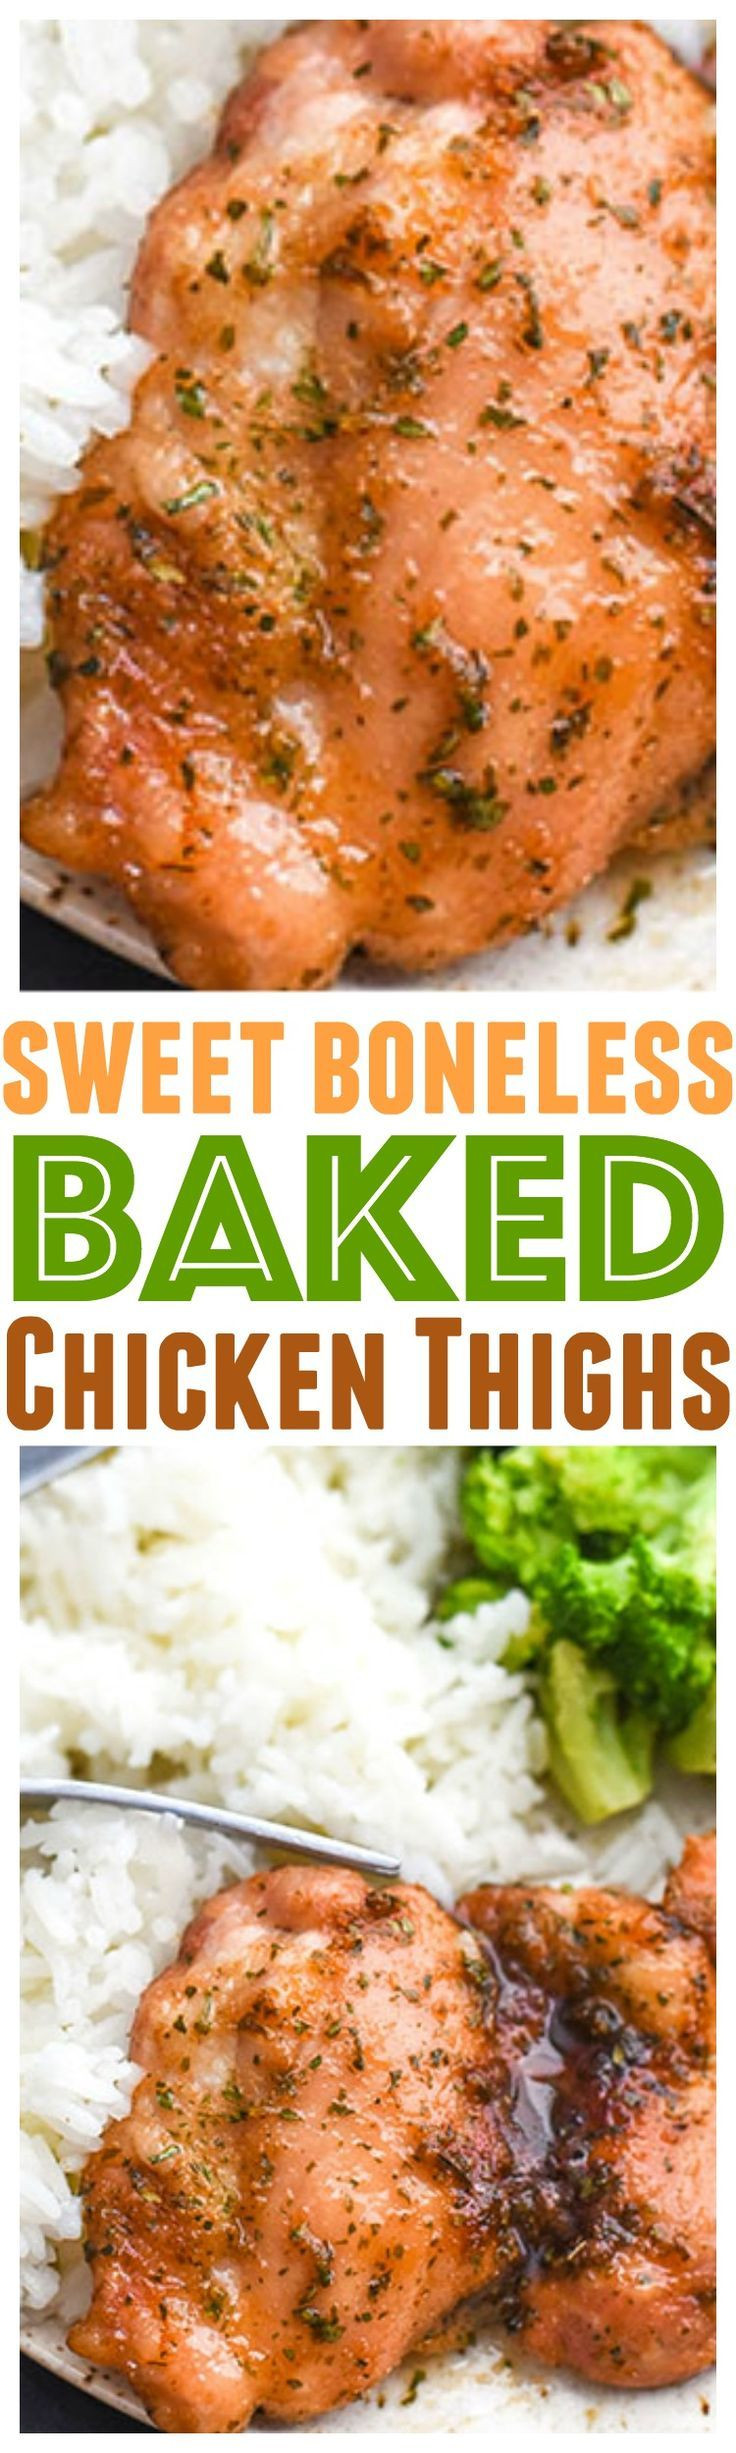 Boneless Skinless Chicken Thighs Recipes
 The 25 best Baked boneless chicken recipes ideas on